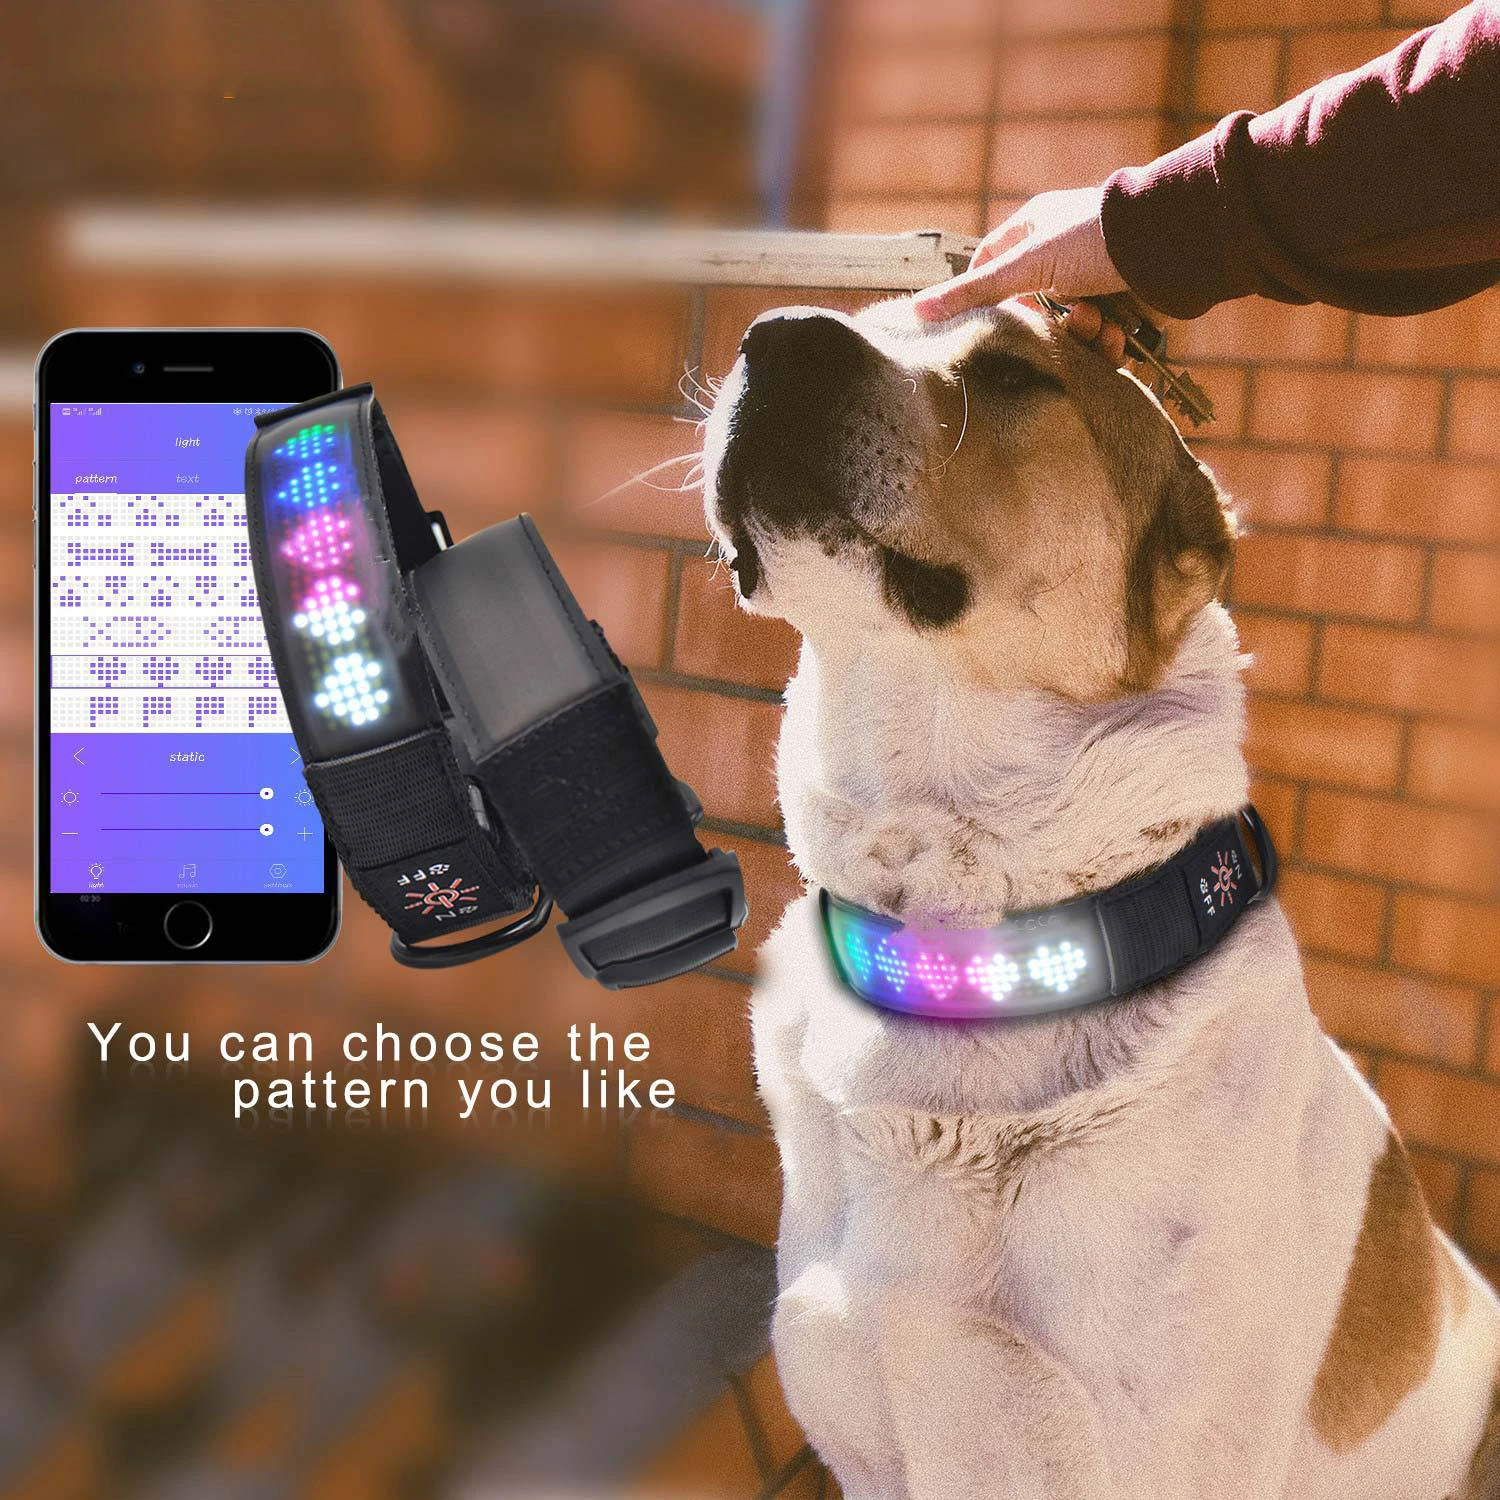 

USB Rechargeable with Water Resistant Flashing Light Collar Pet App Controlled Scrolling Message Safety LED Dog Collar, Red black yellow etc...or customized